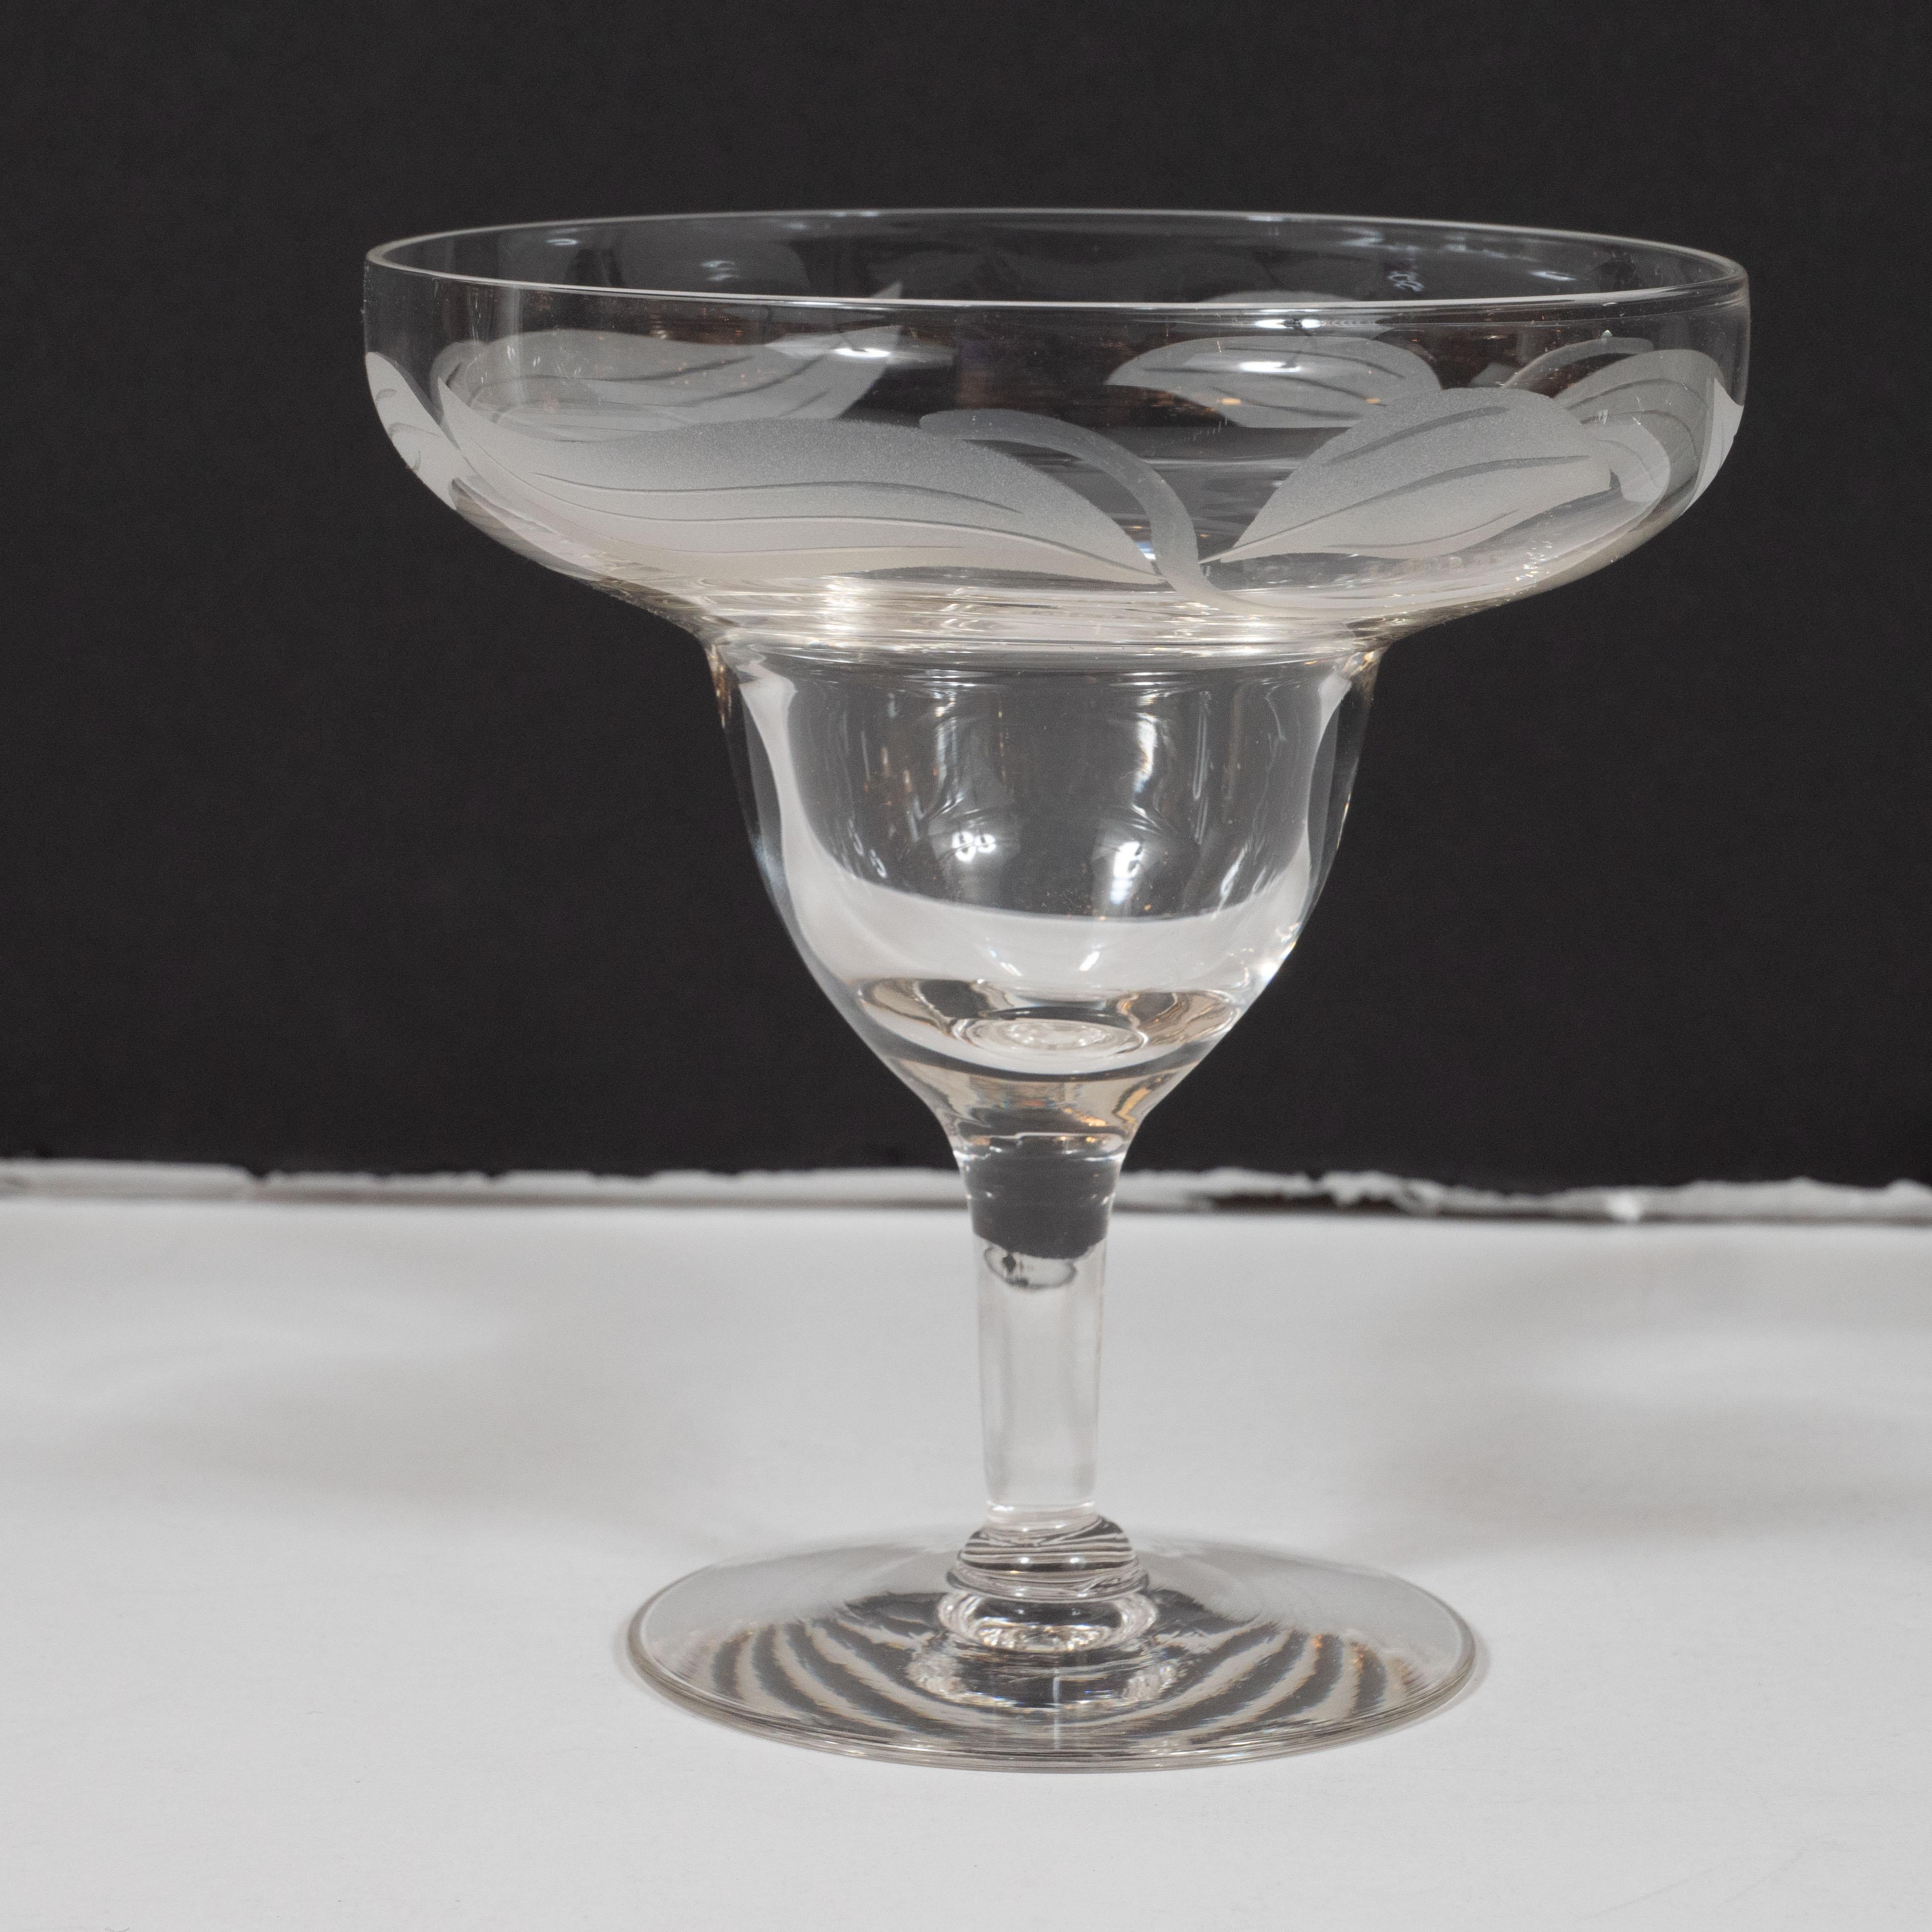 Mid-20th Century Art Deco Translucent Footed Glass Dessert Bowls with Frosted Foliate Detailing For Sale